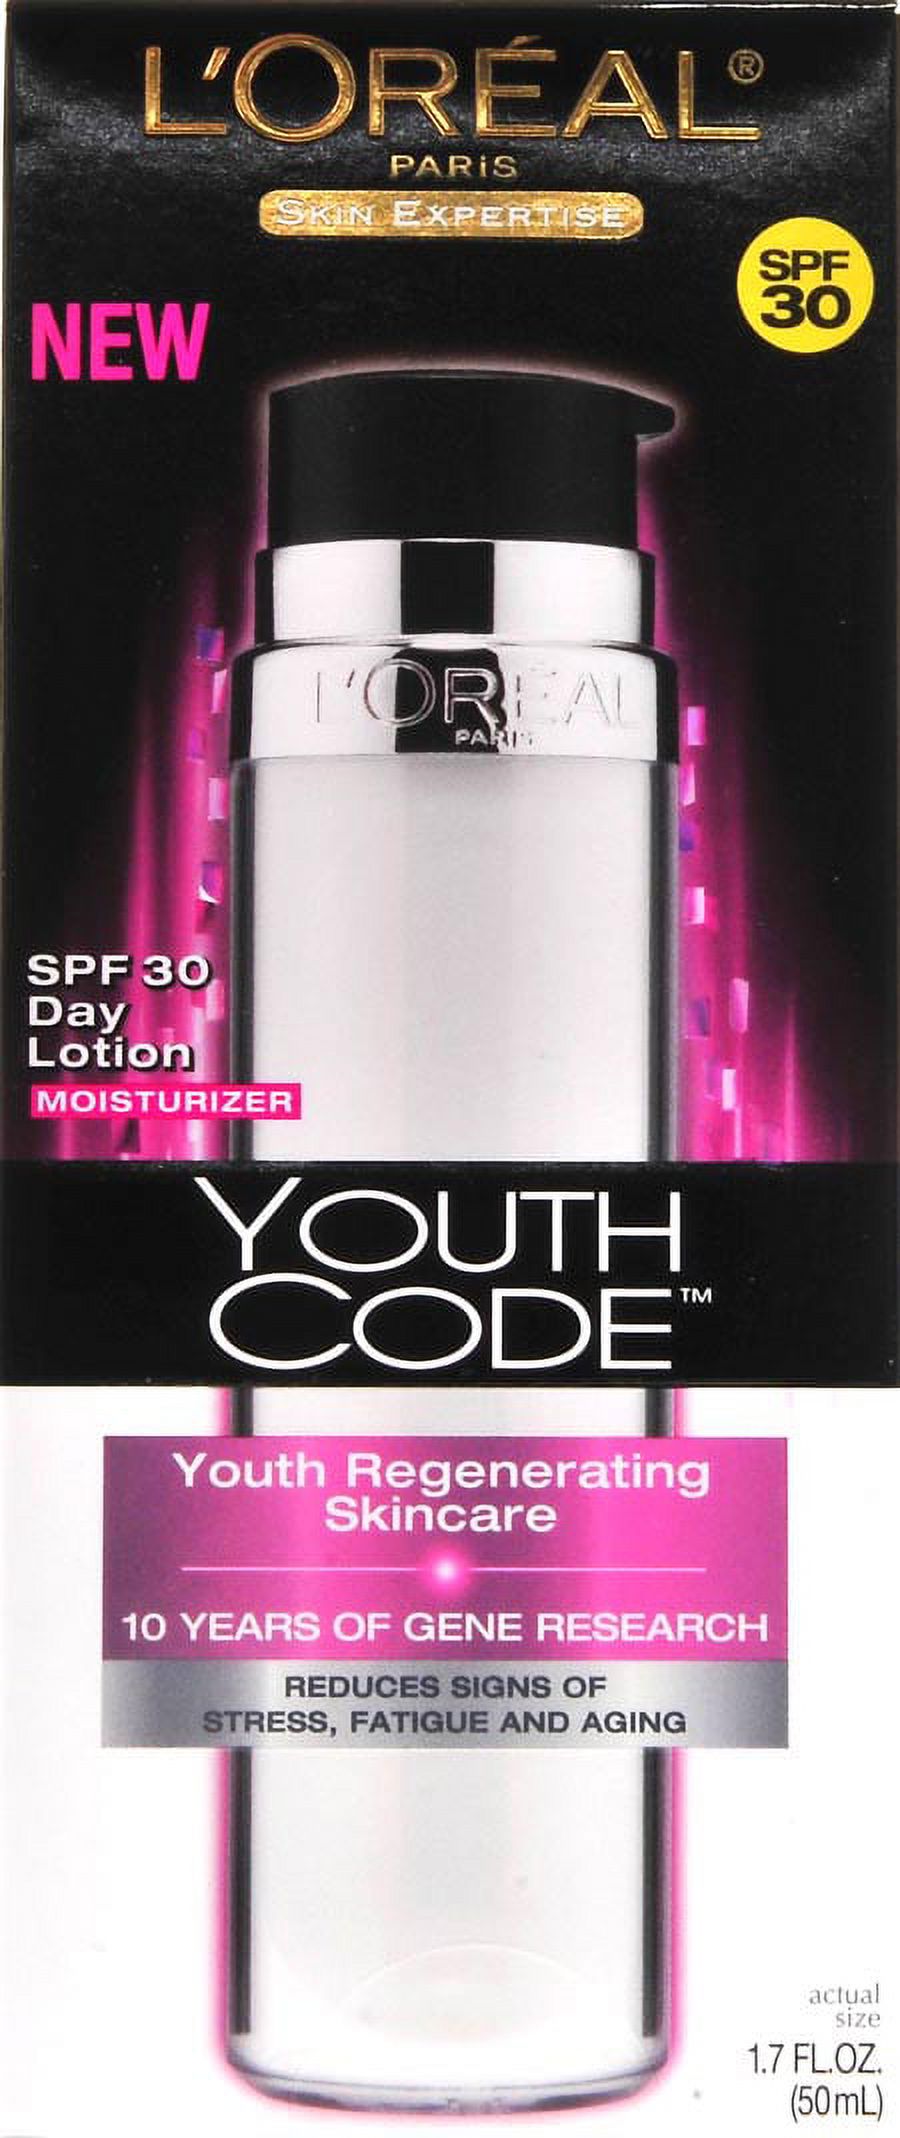 L'Oreal Paris Skin Expertise Youth Code Day Lotion SPF 30 L'Oreal Paris 1.7 oz Lotion Unisex - image 2 of 4